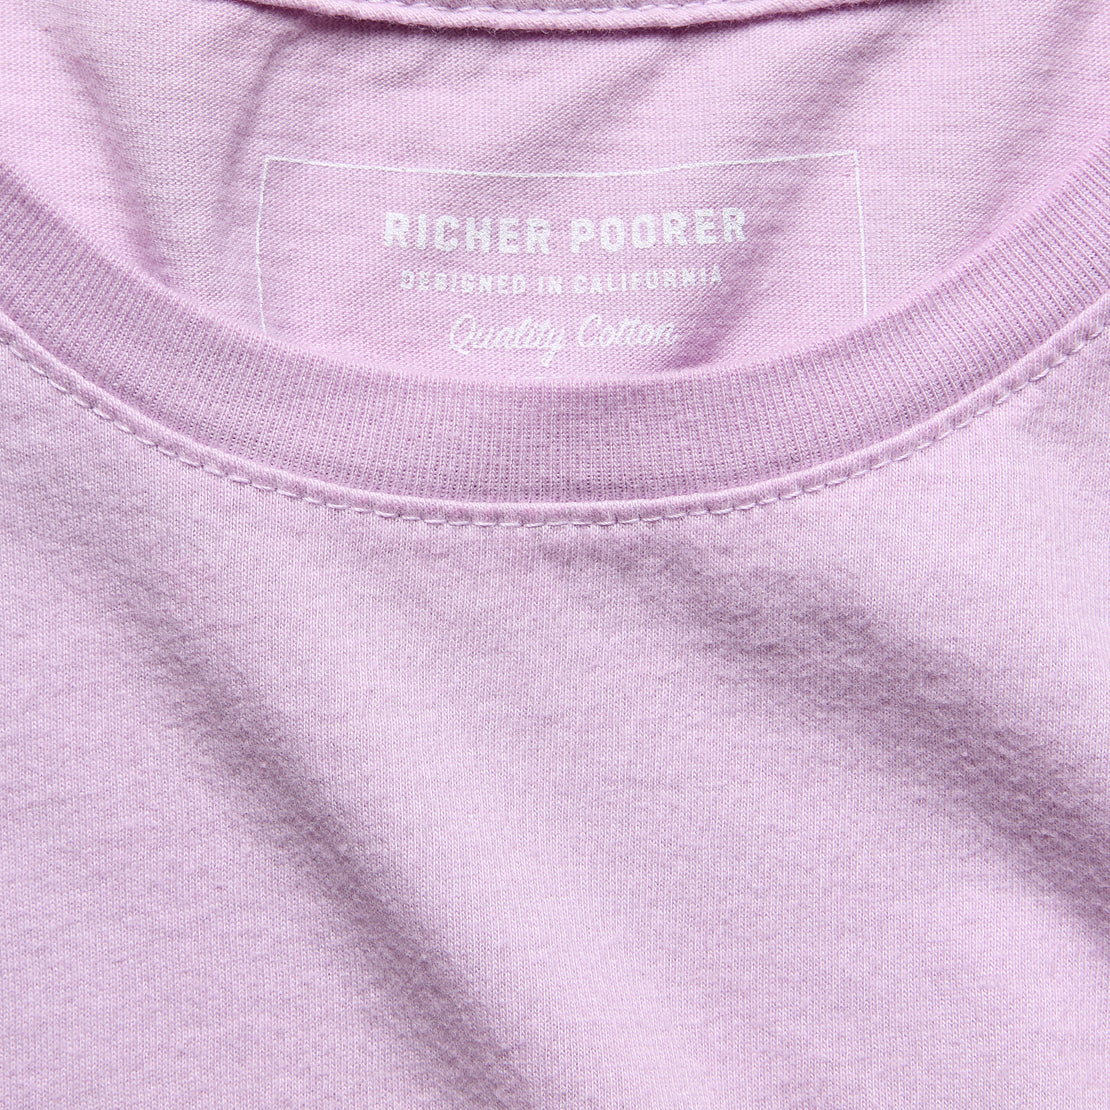 Boxy Crop Tee - Lilac - Richer Poorer - STAG Provisions - W - Tops - S/S Tee